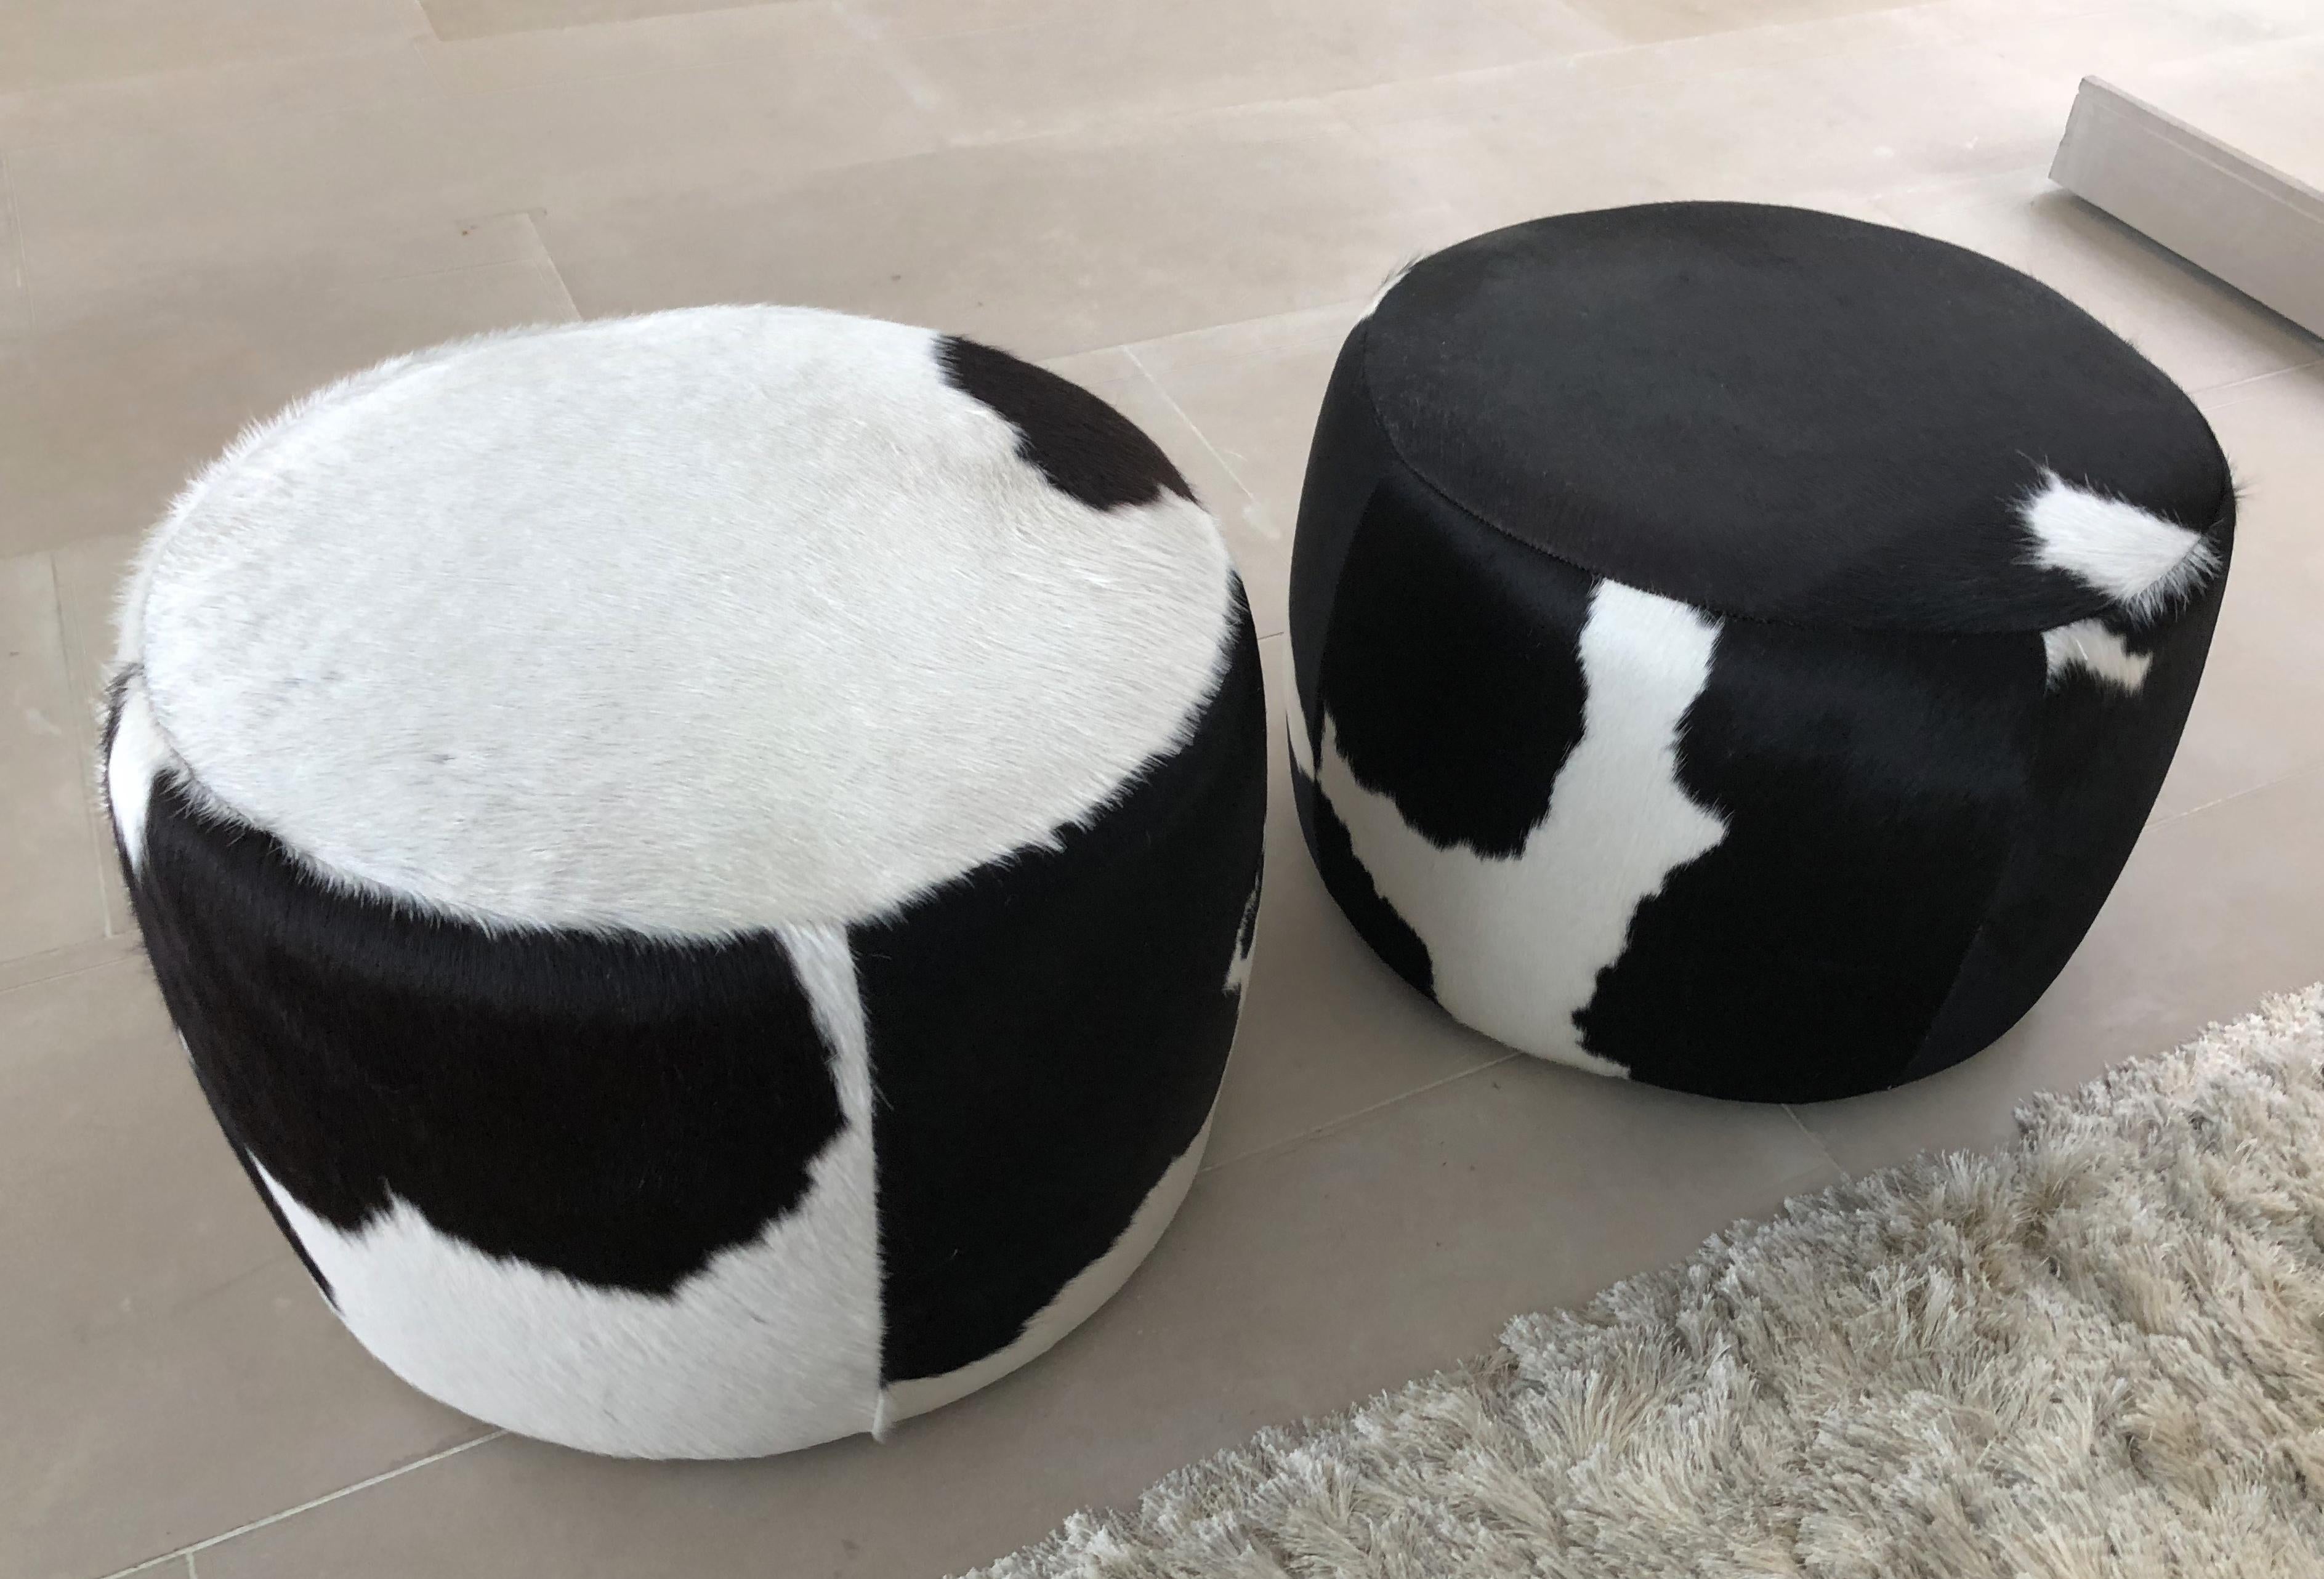 Beautiful set of two poufs or ottomans or foot stools upholstered in a beautiful cowhide material, the pieces are in excellent condition and they are ready to be used.

Measurements:
21